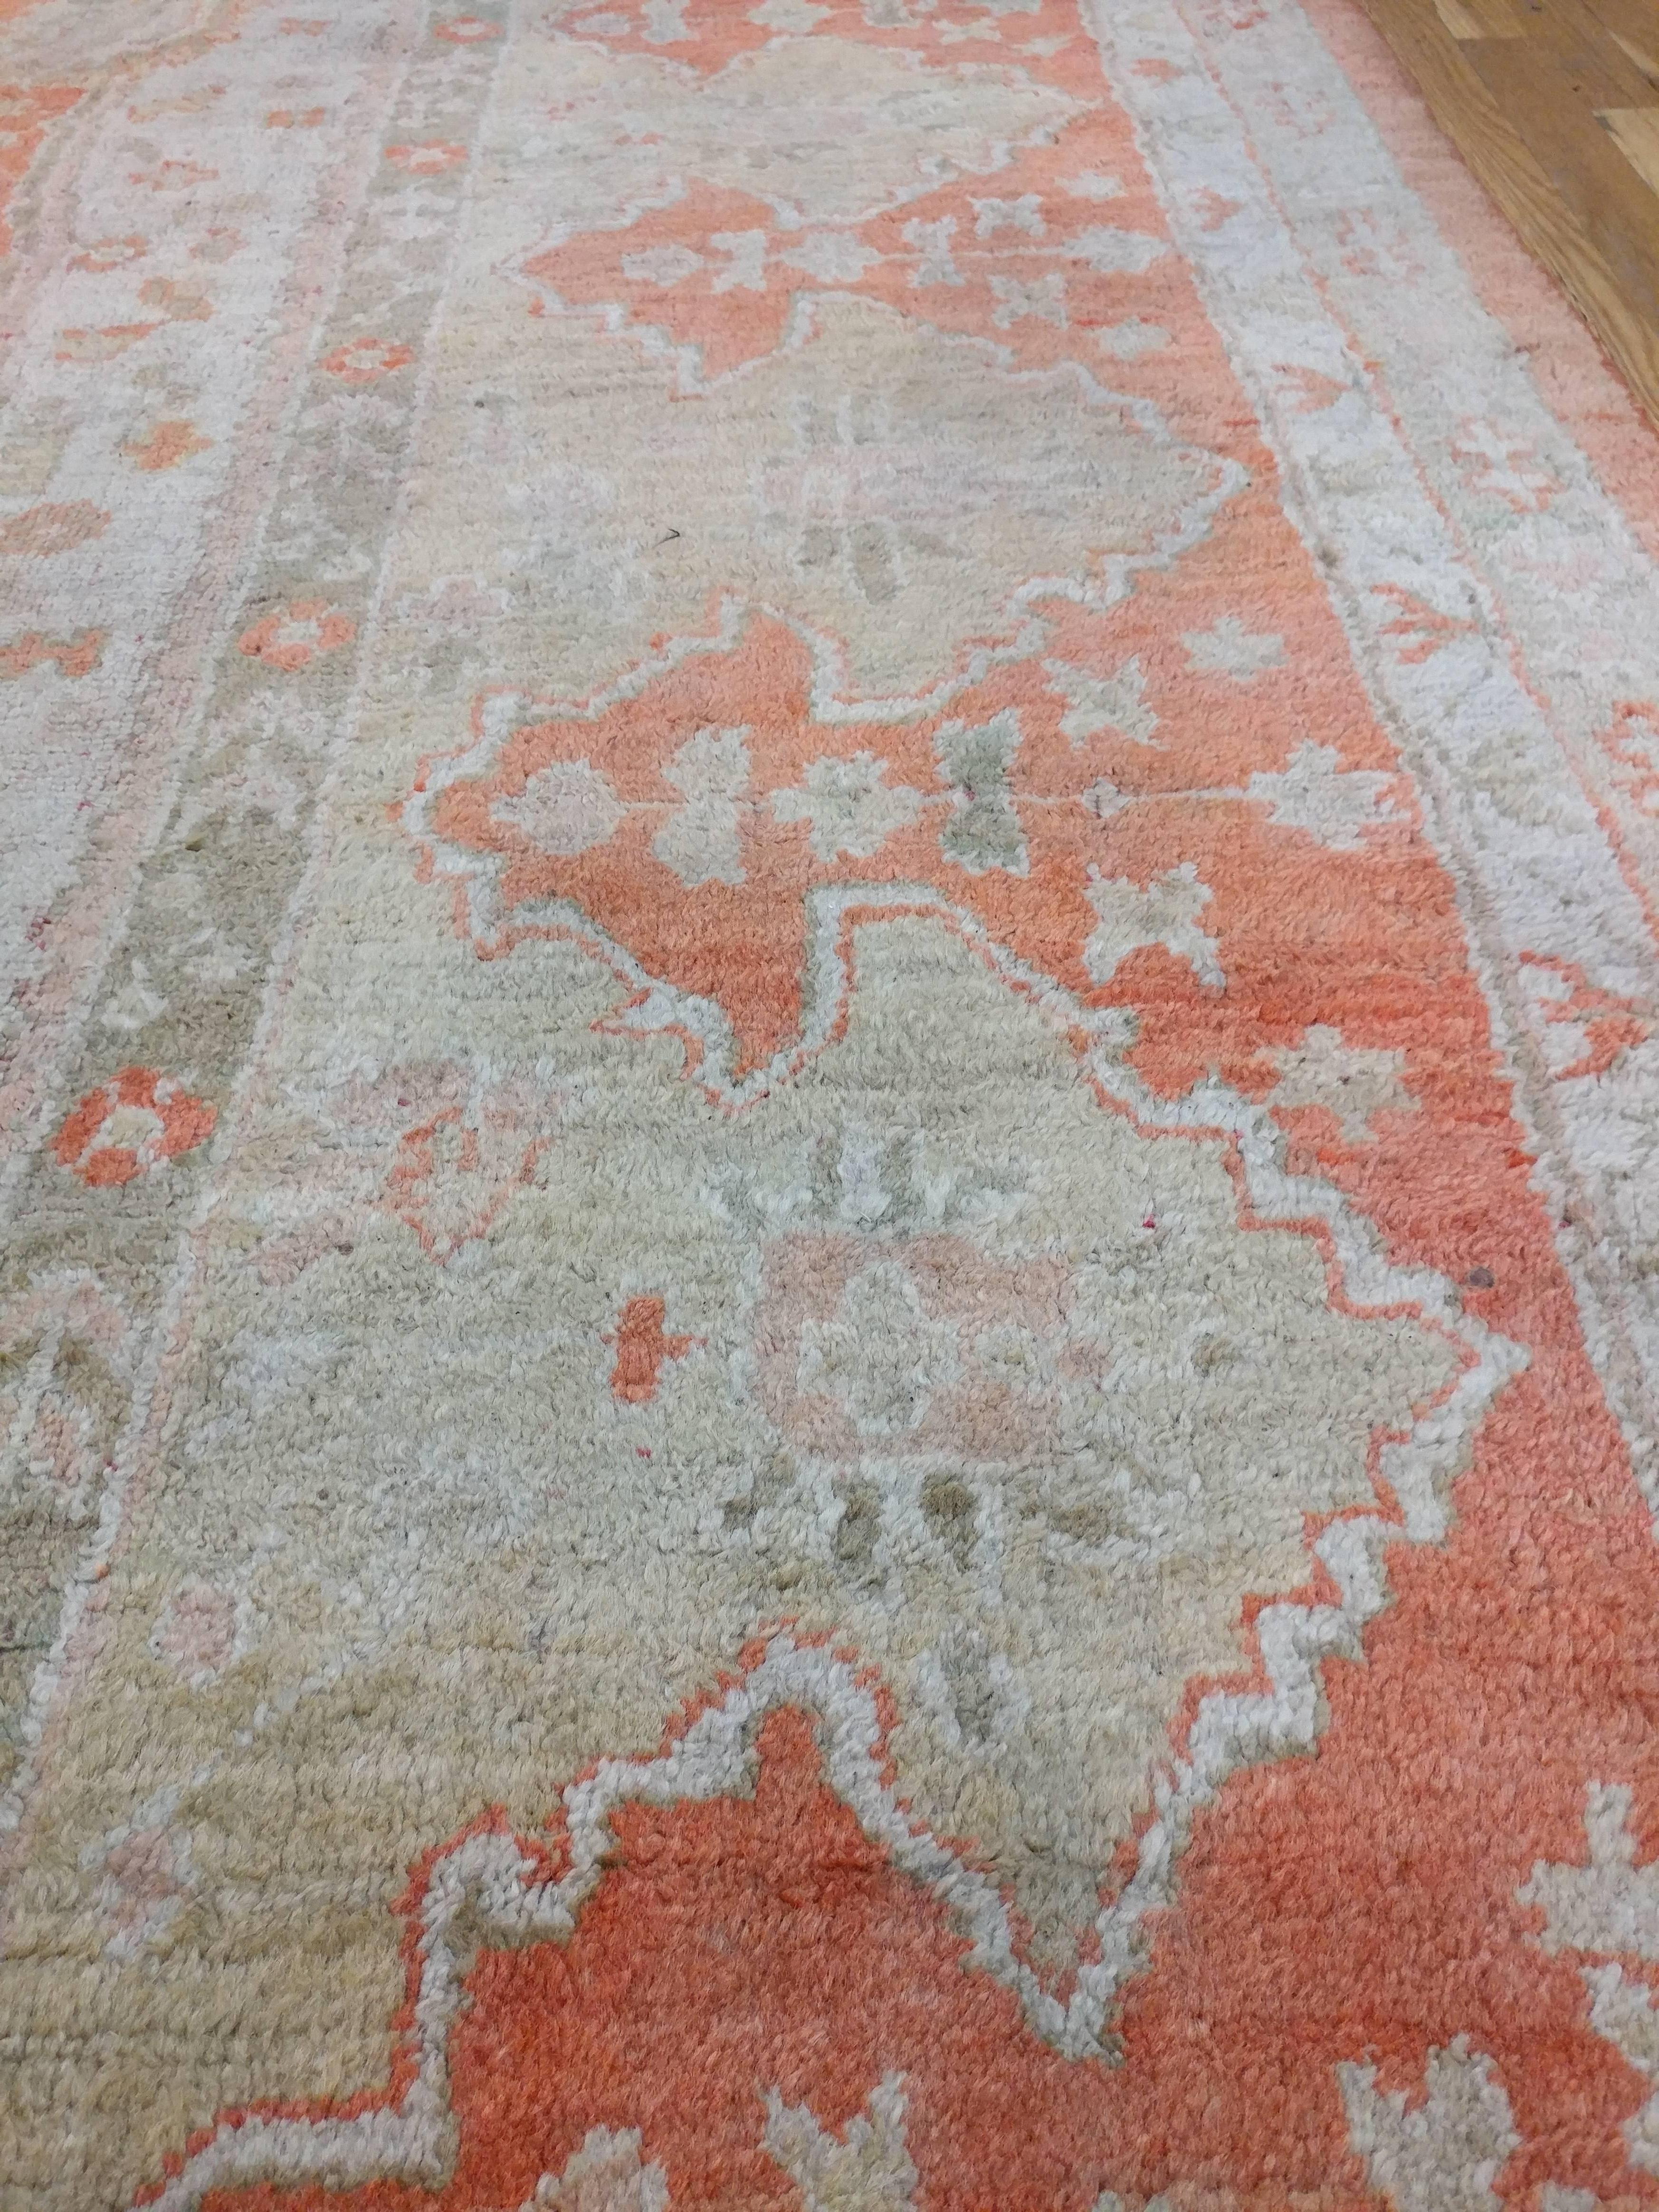 19th Century Antique Oushak Carpet, Turkish Rugs, Handmade Oriental Rugs, Ivory Coral Taupe